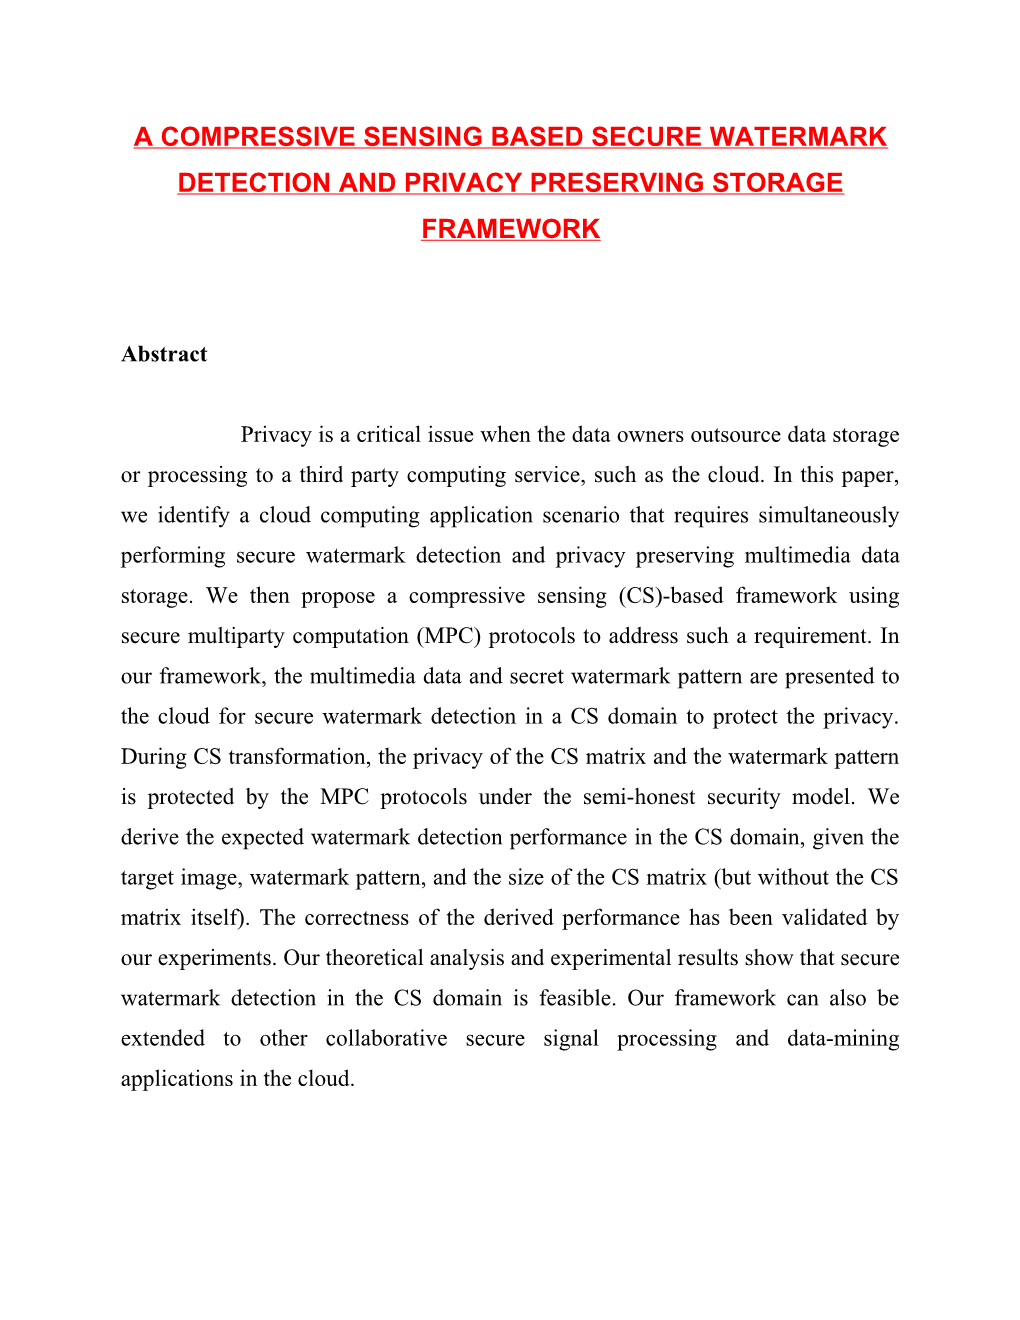 A Compressive Sensing Based Secure Watermark Detection and Privacy Preserving Storage